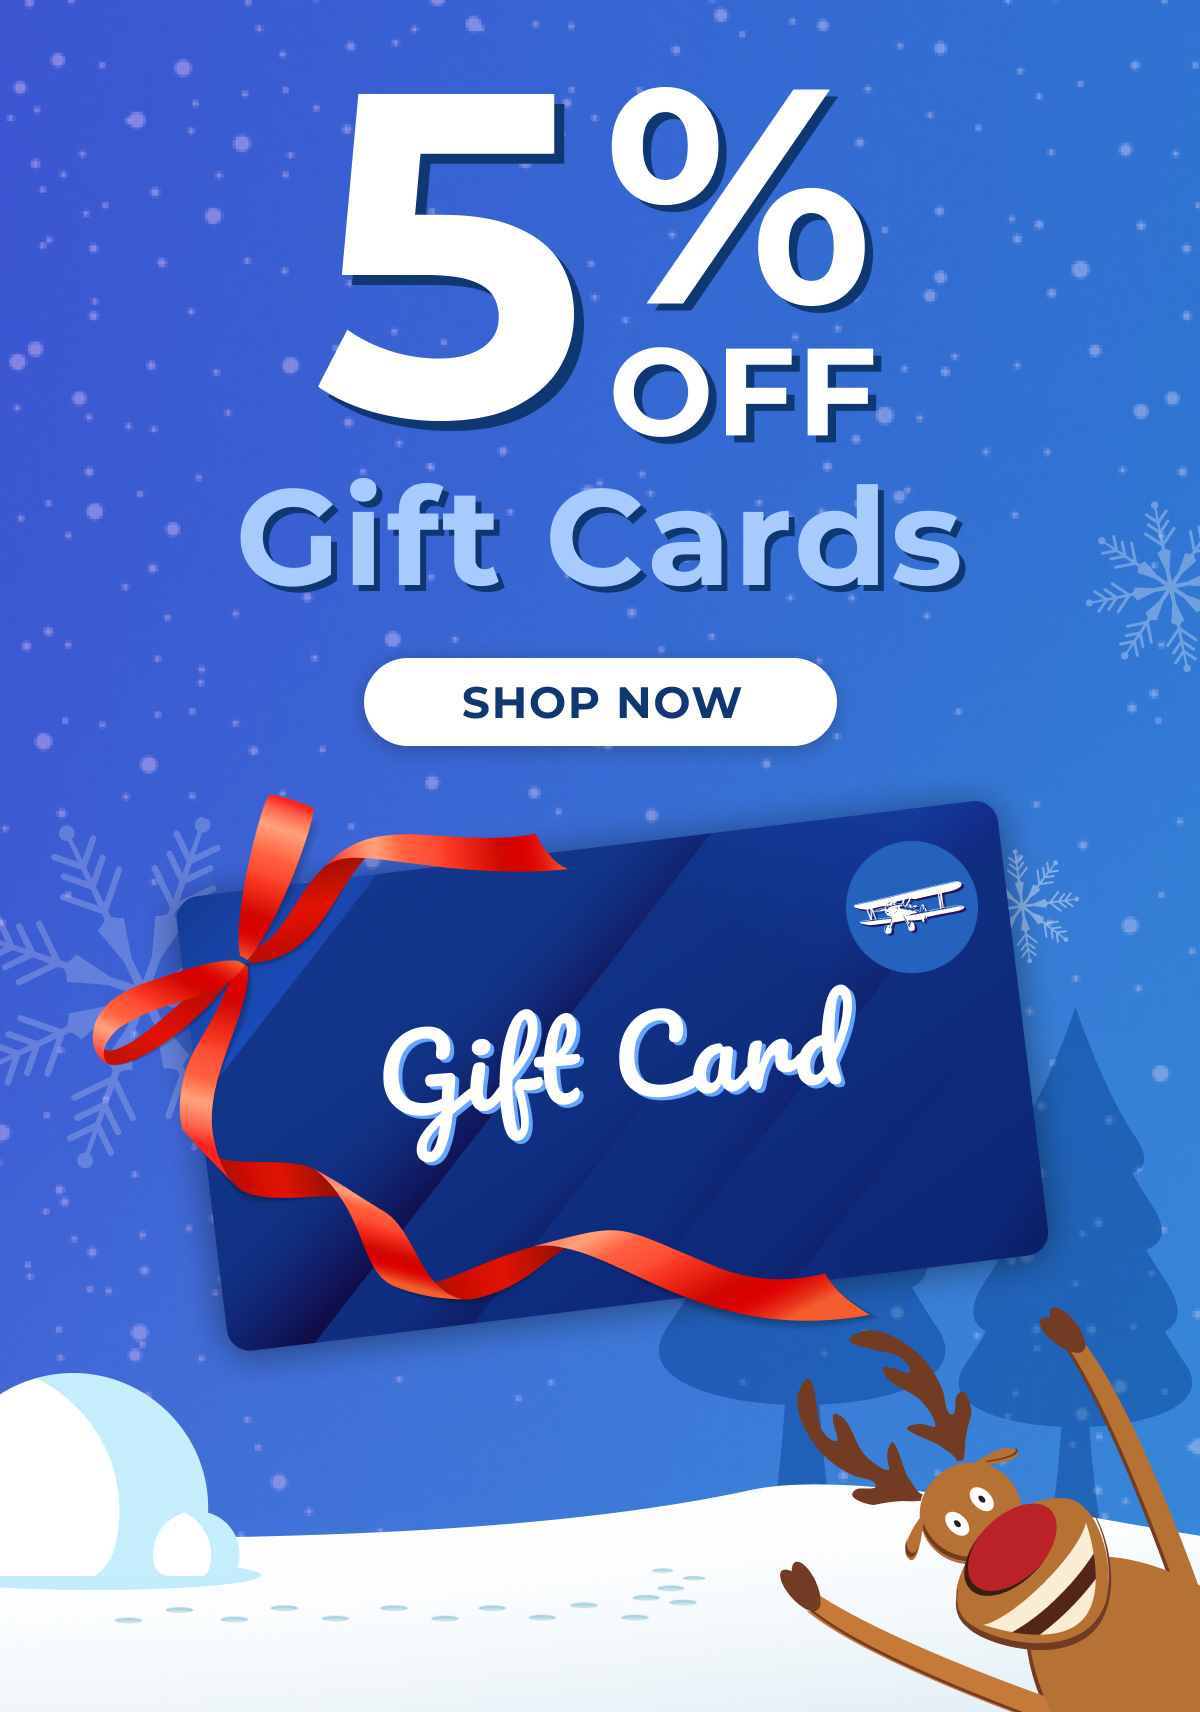 5% OFF GIFT CARDS